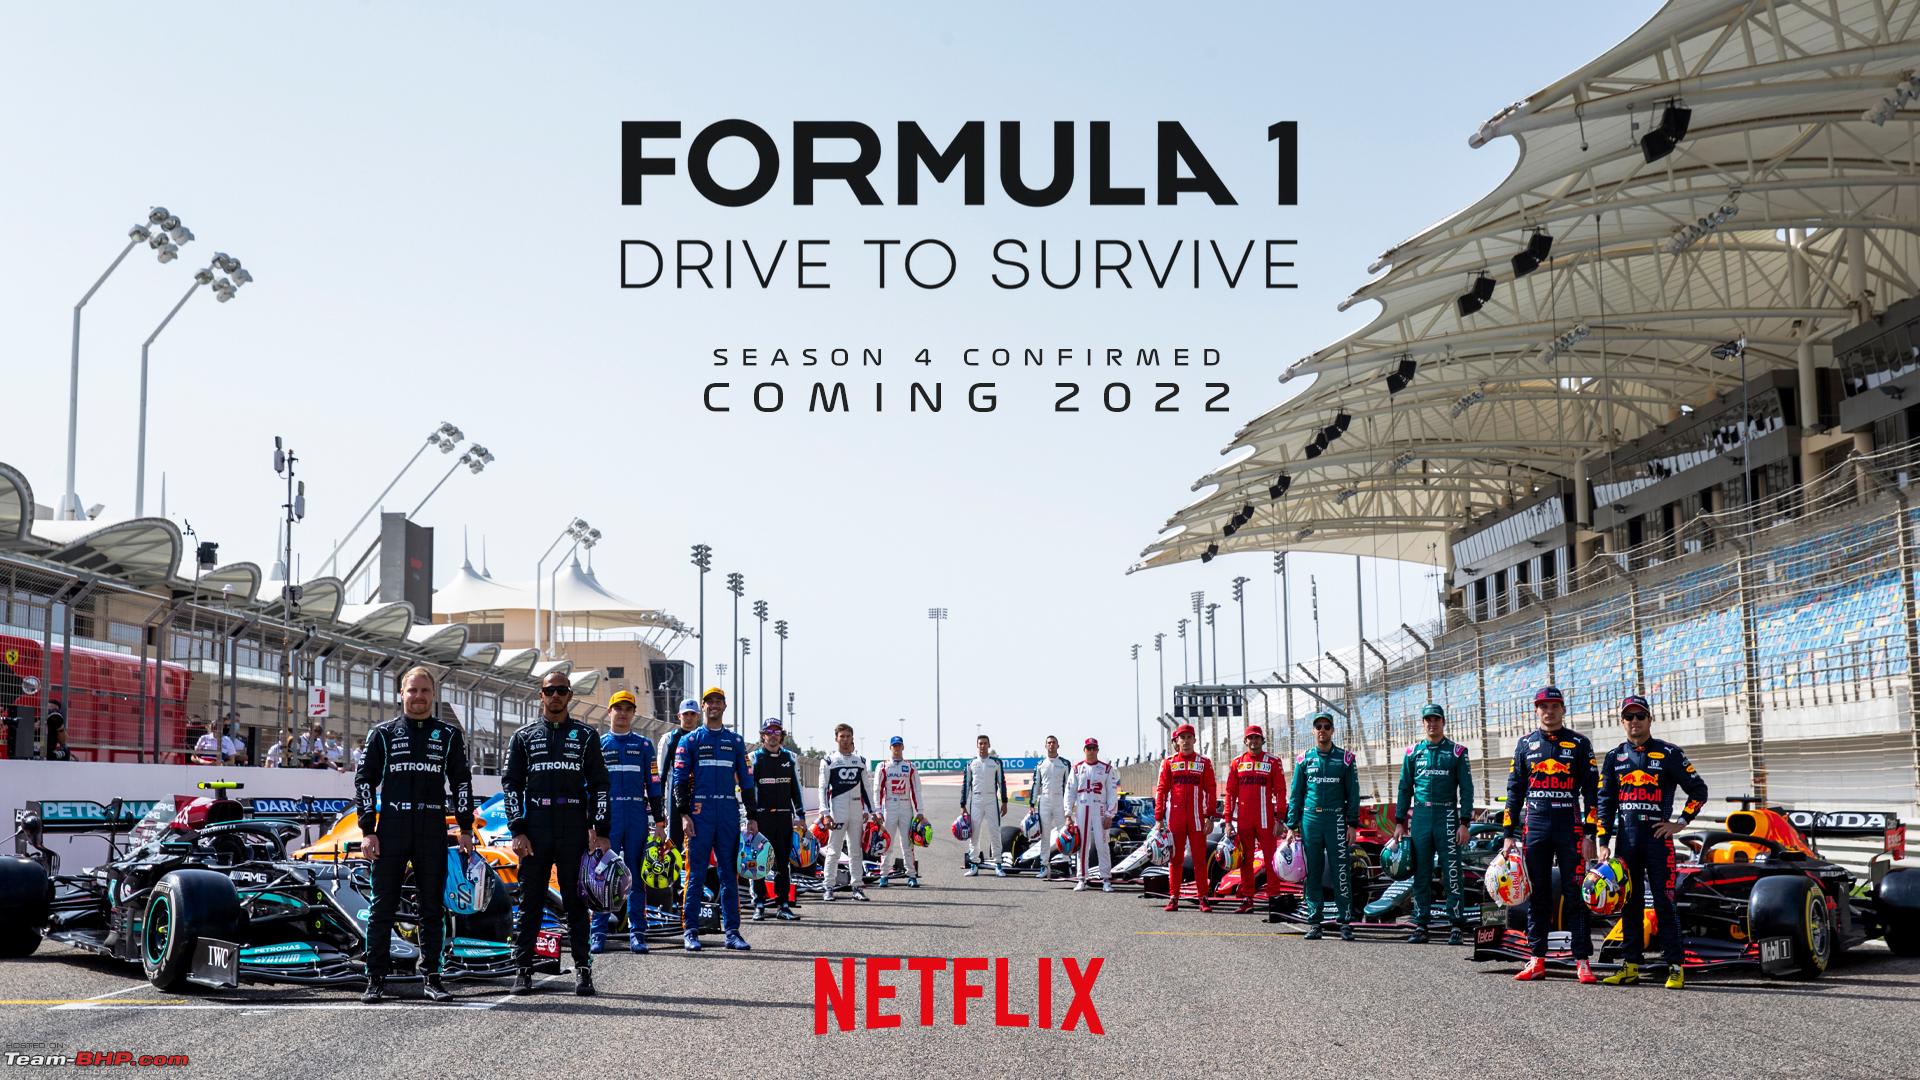 Drive to survive: Netflix's new F1 documentary series - Page 2 - Team-BHP